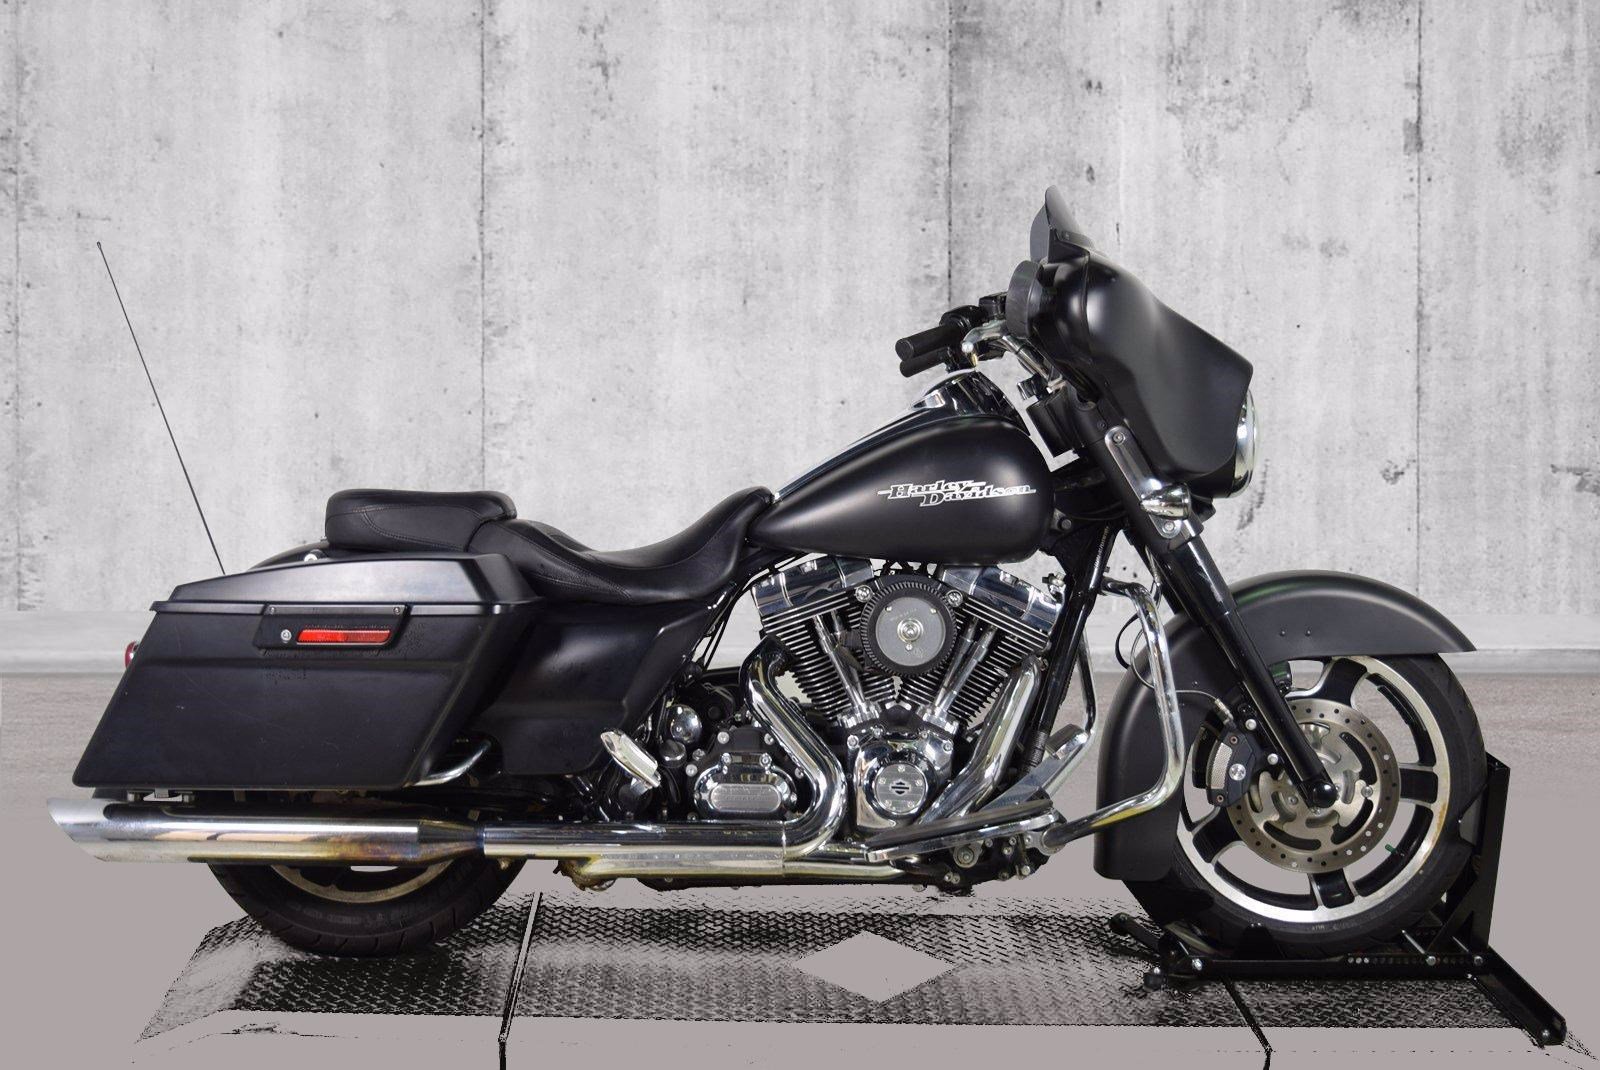 Pre-Owned 2013 Harley-Davidson Street Glide FLHX Touring ...